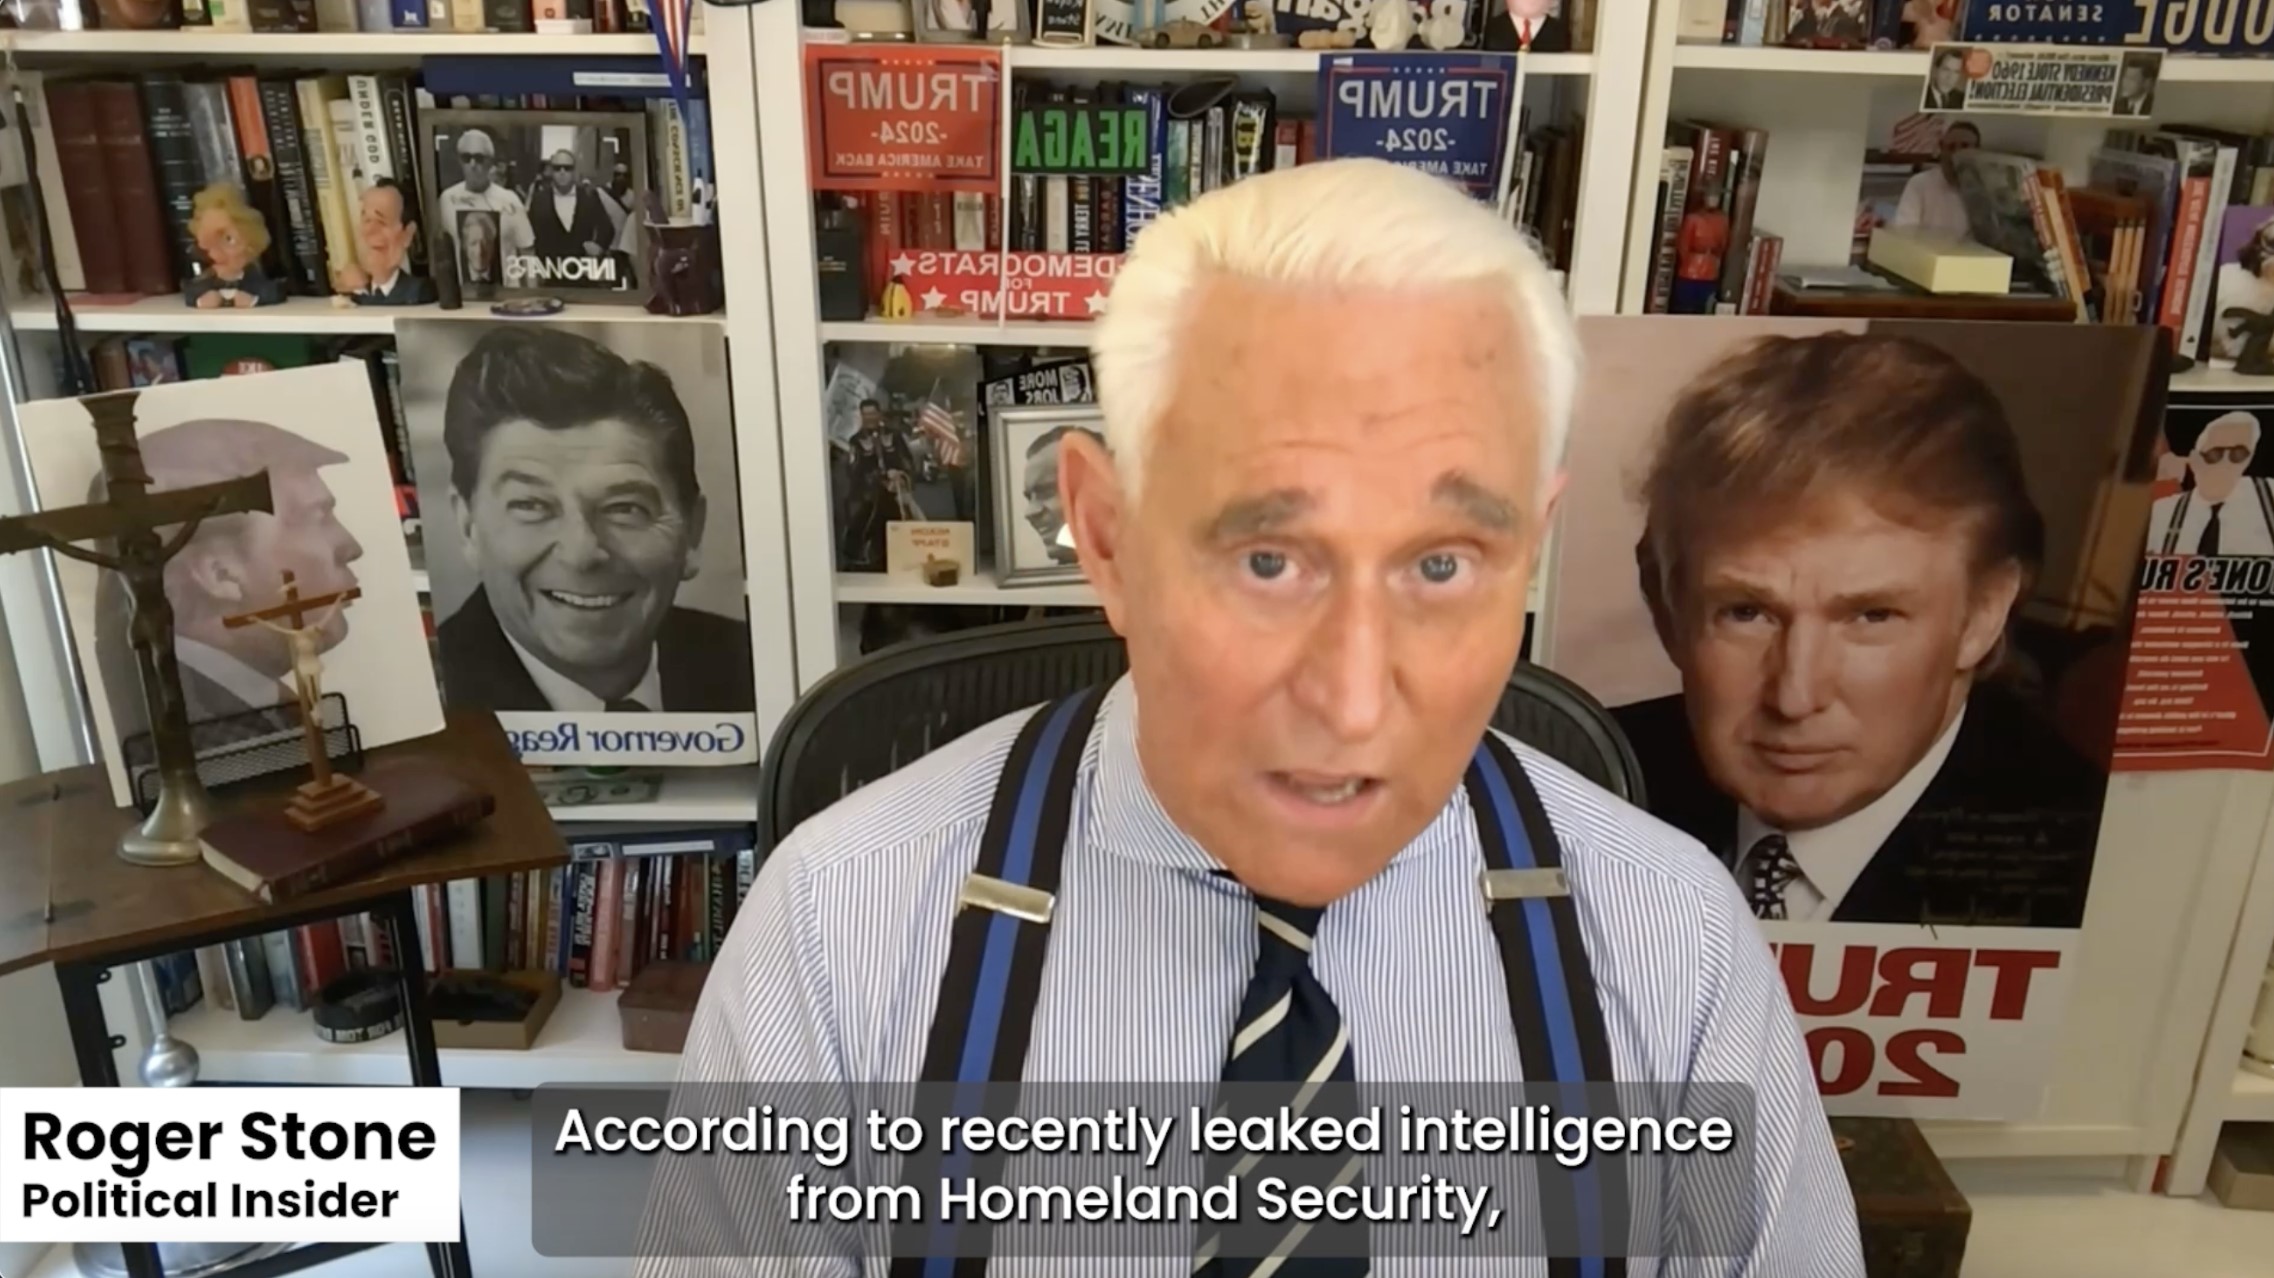 Urgent Message From Roger Stone: This could starve U.S. into submission